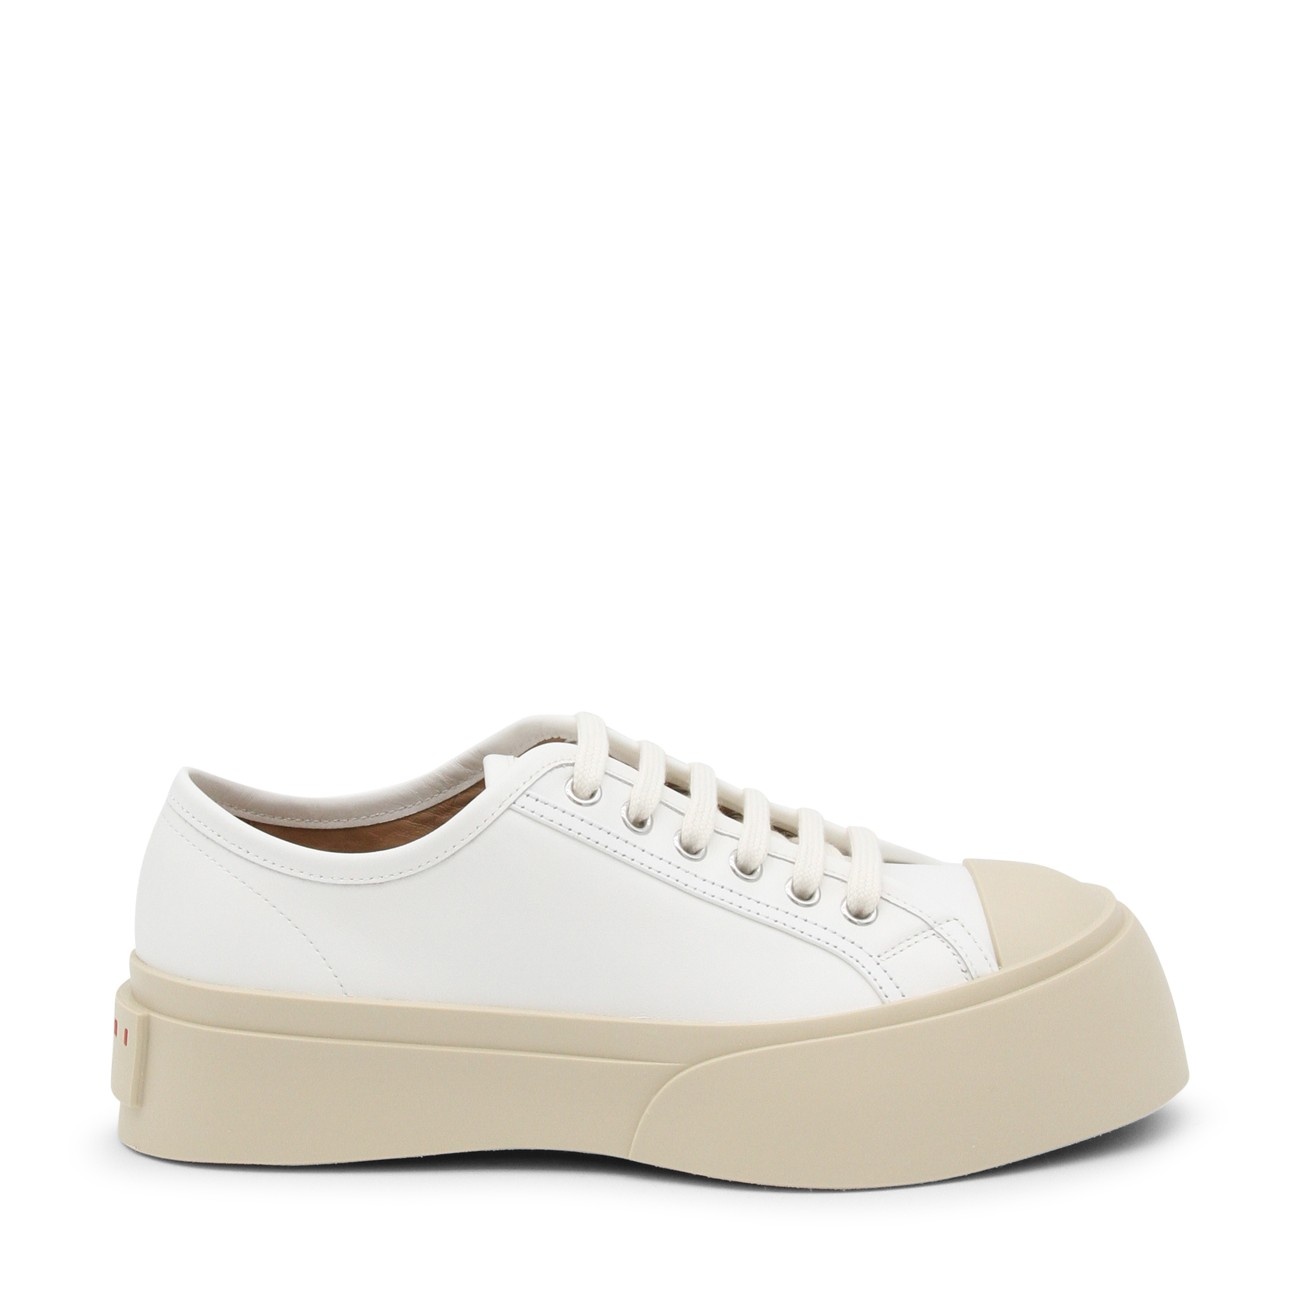 white leather pablo sneakers - 1